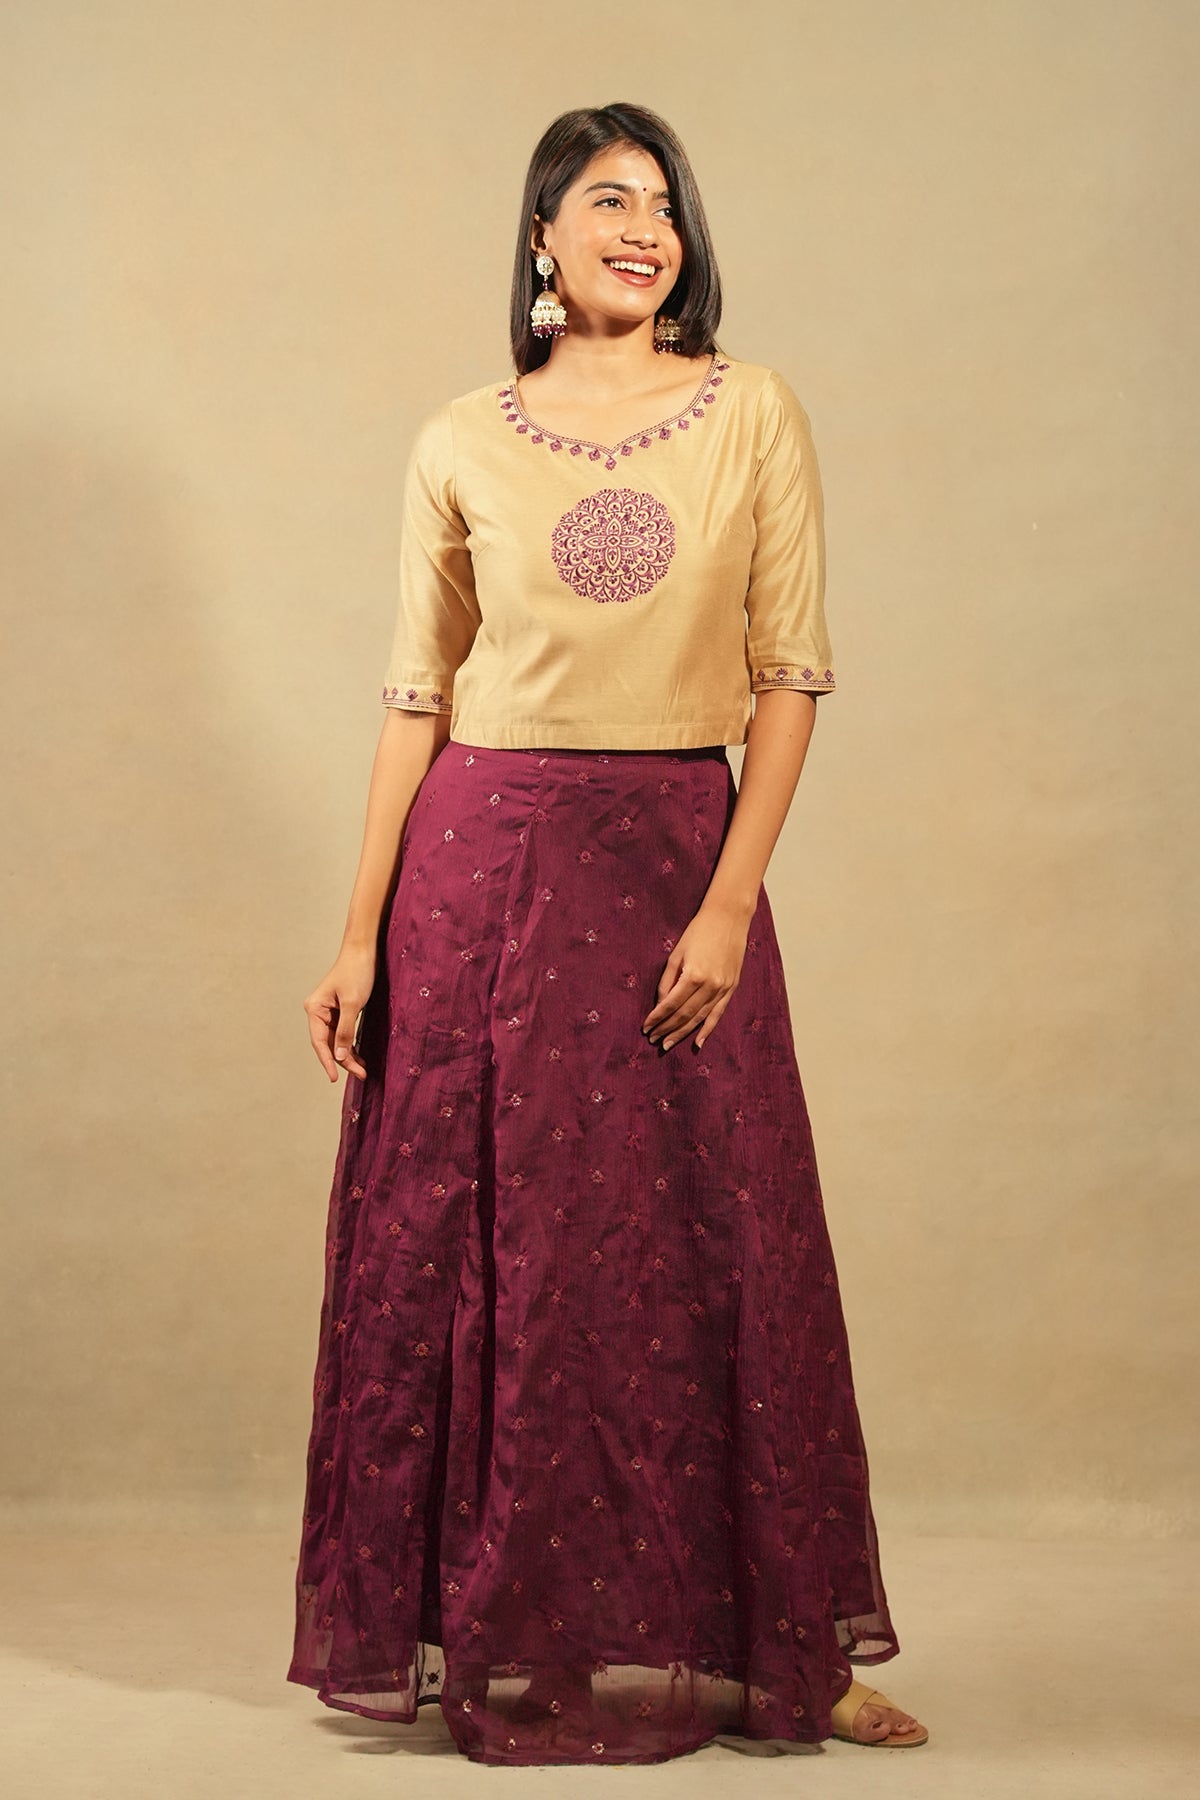 Mandala Placement Top With All Over Sequins Skirt Set Beige Burgundy